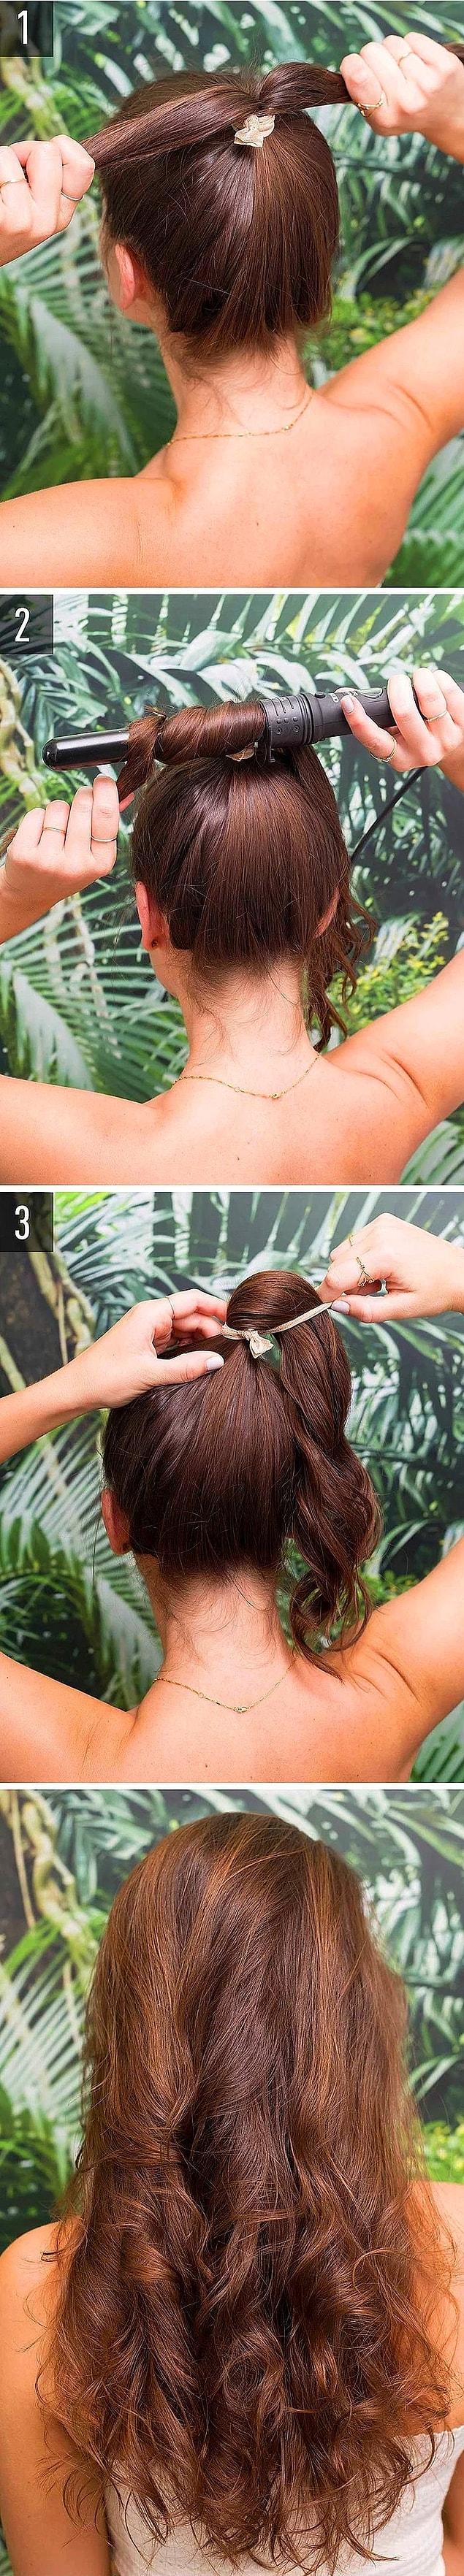 9. Another quick way to curl your hair!